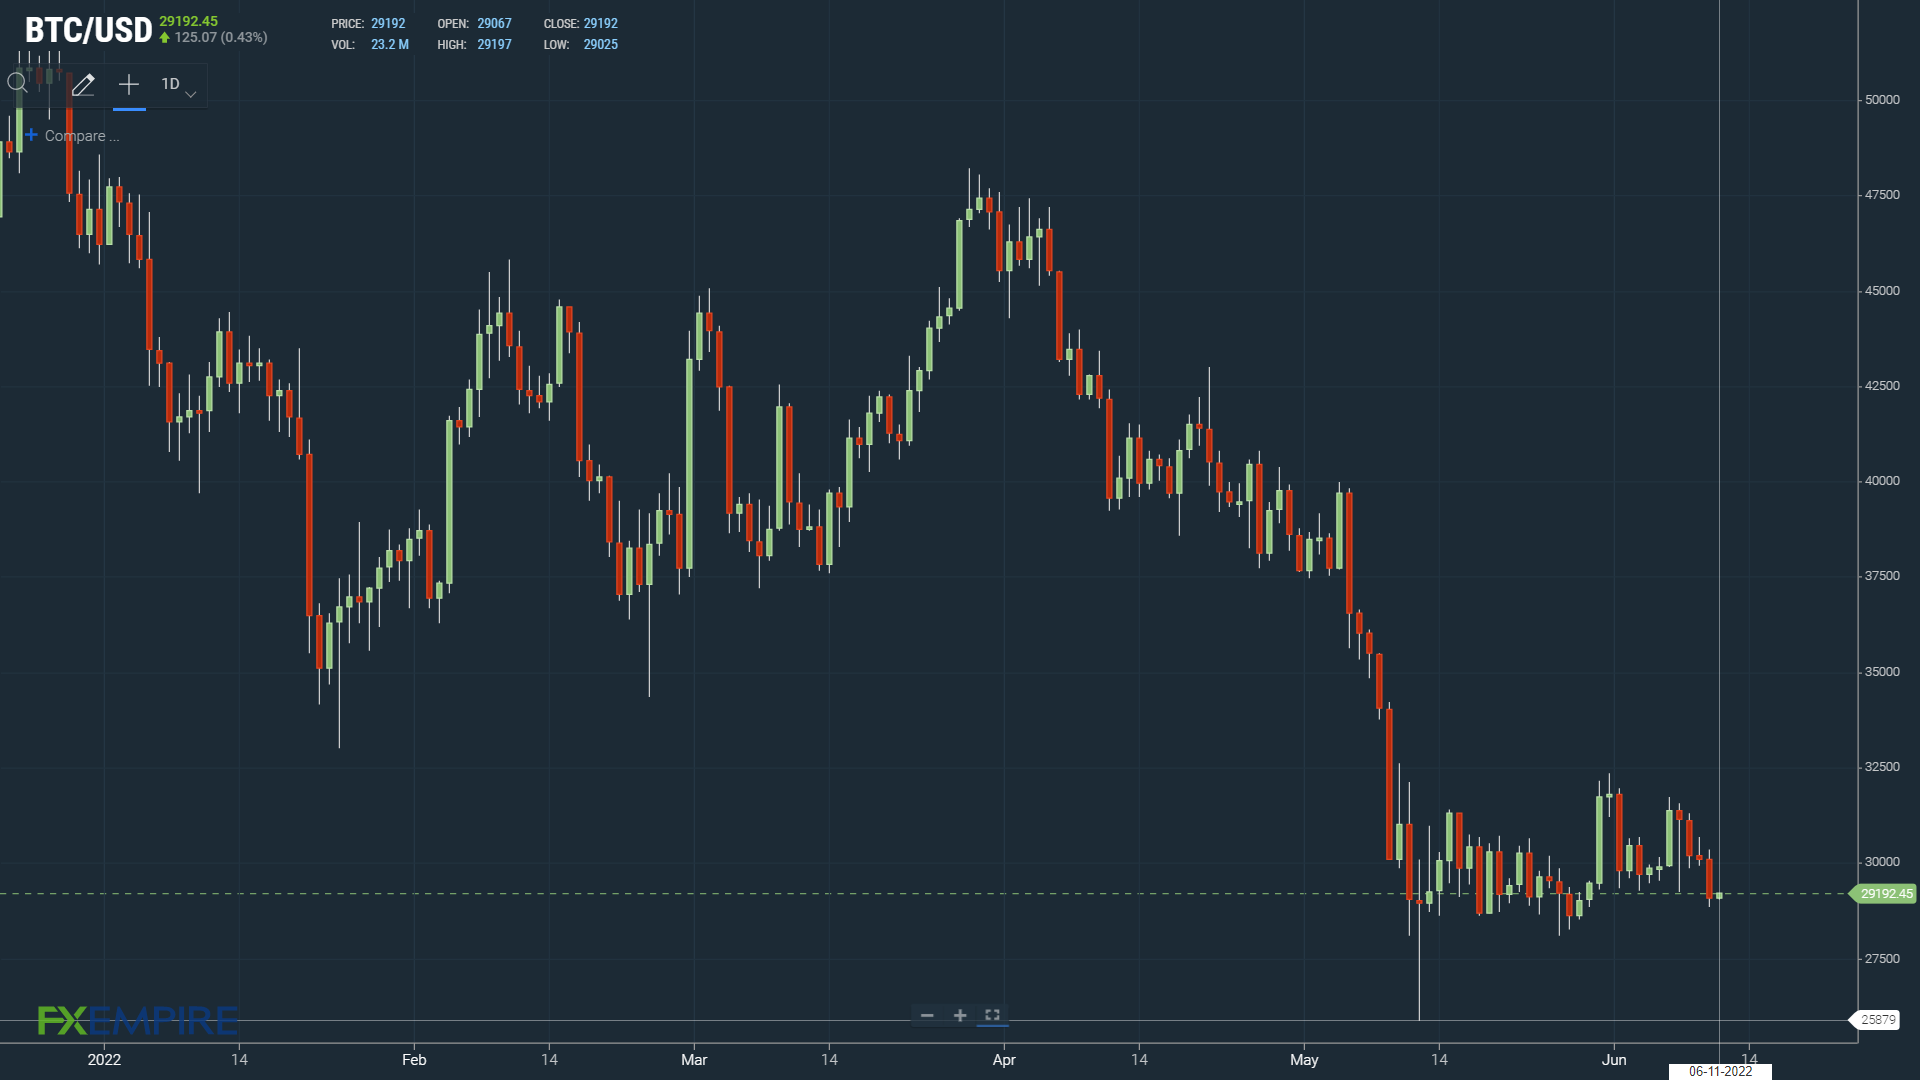 BTC finds modest support early on.